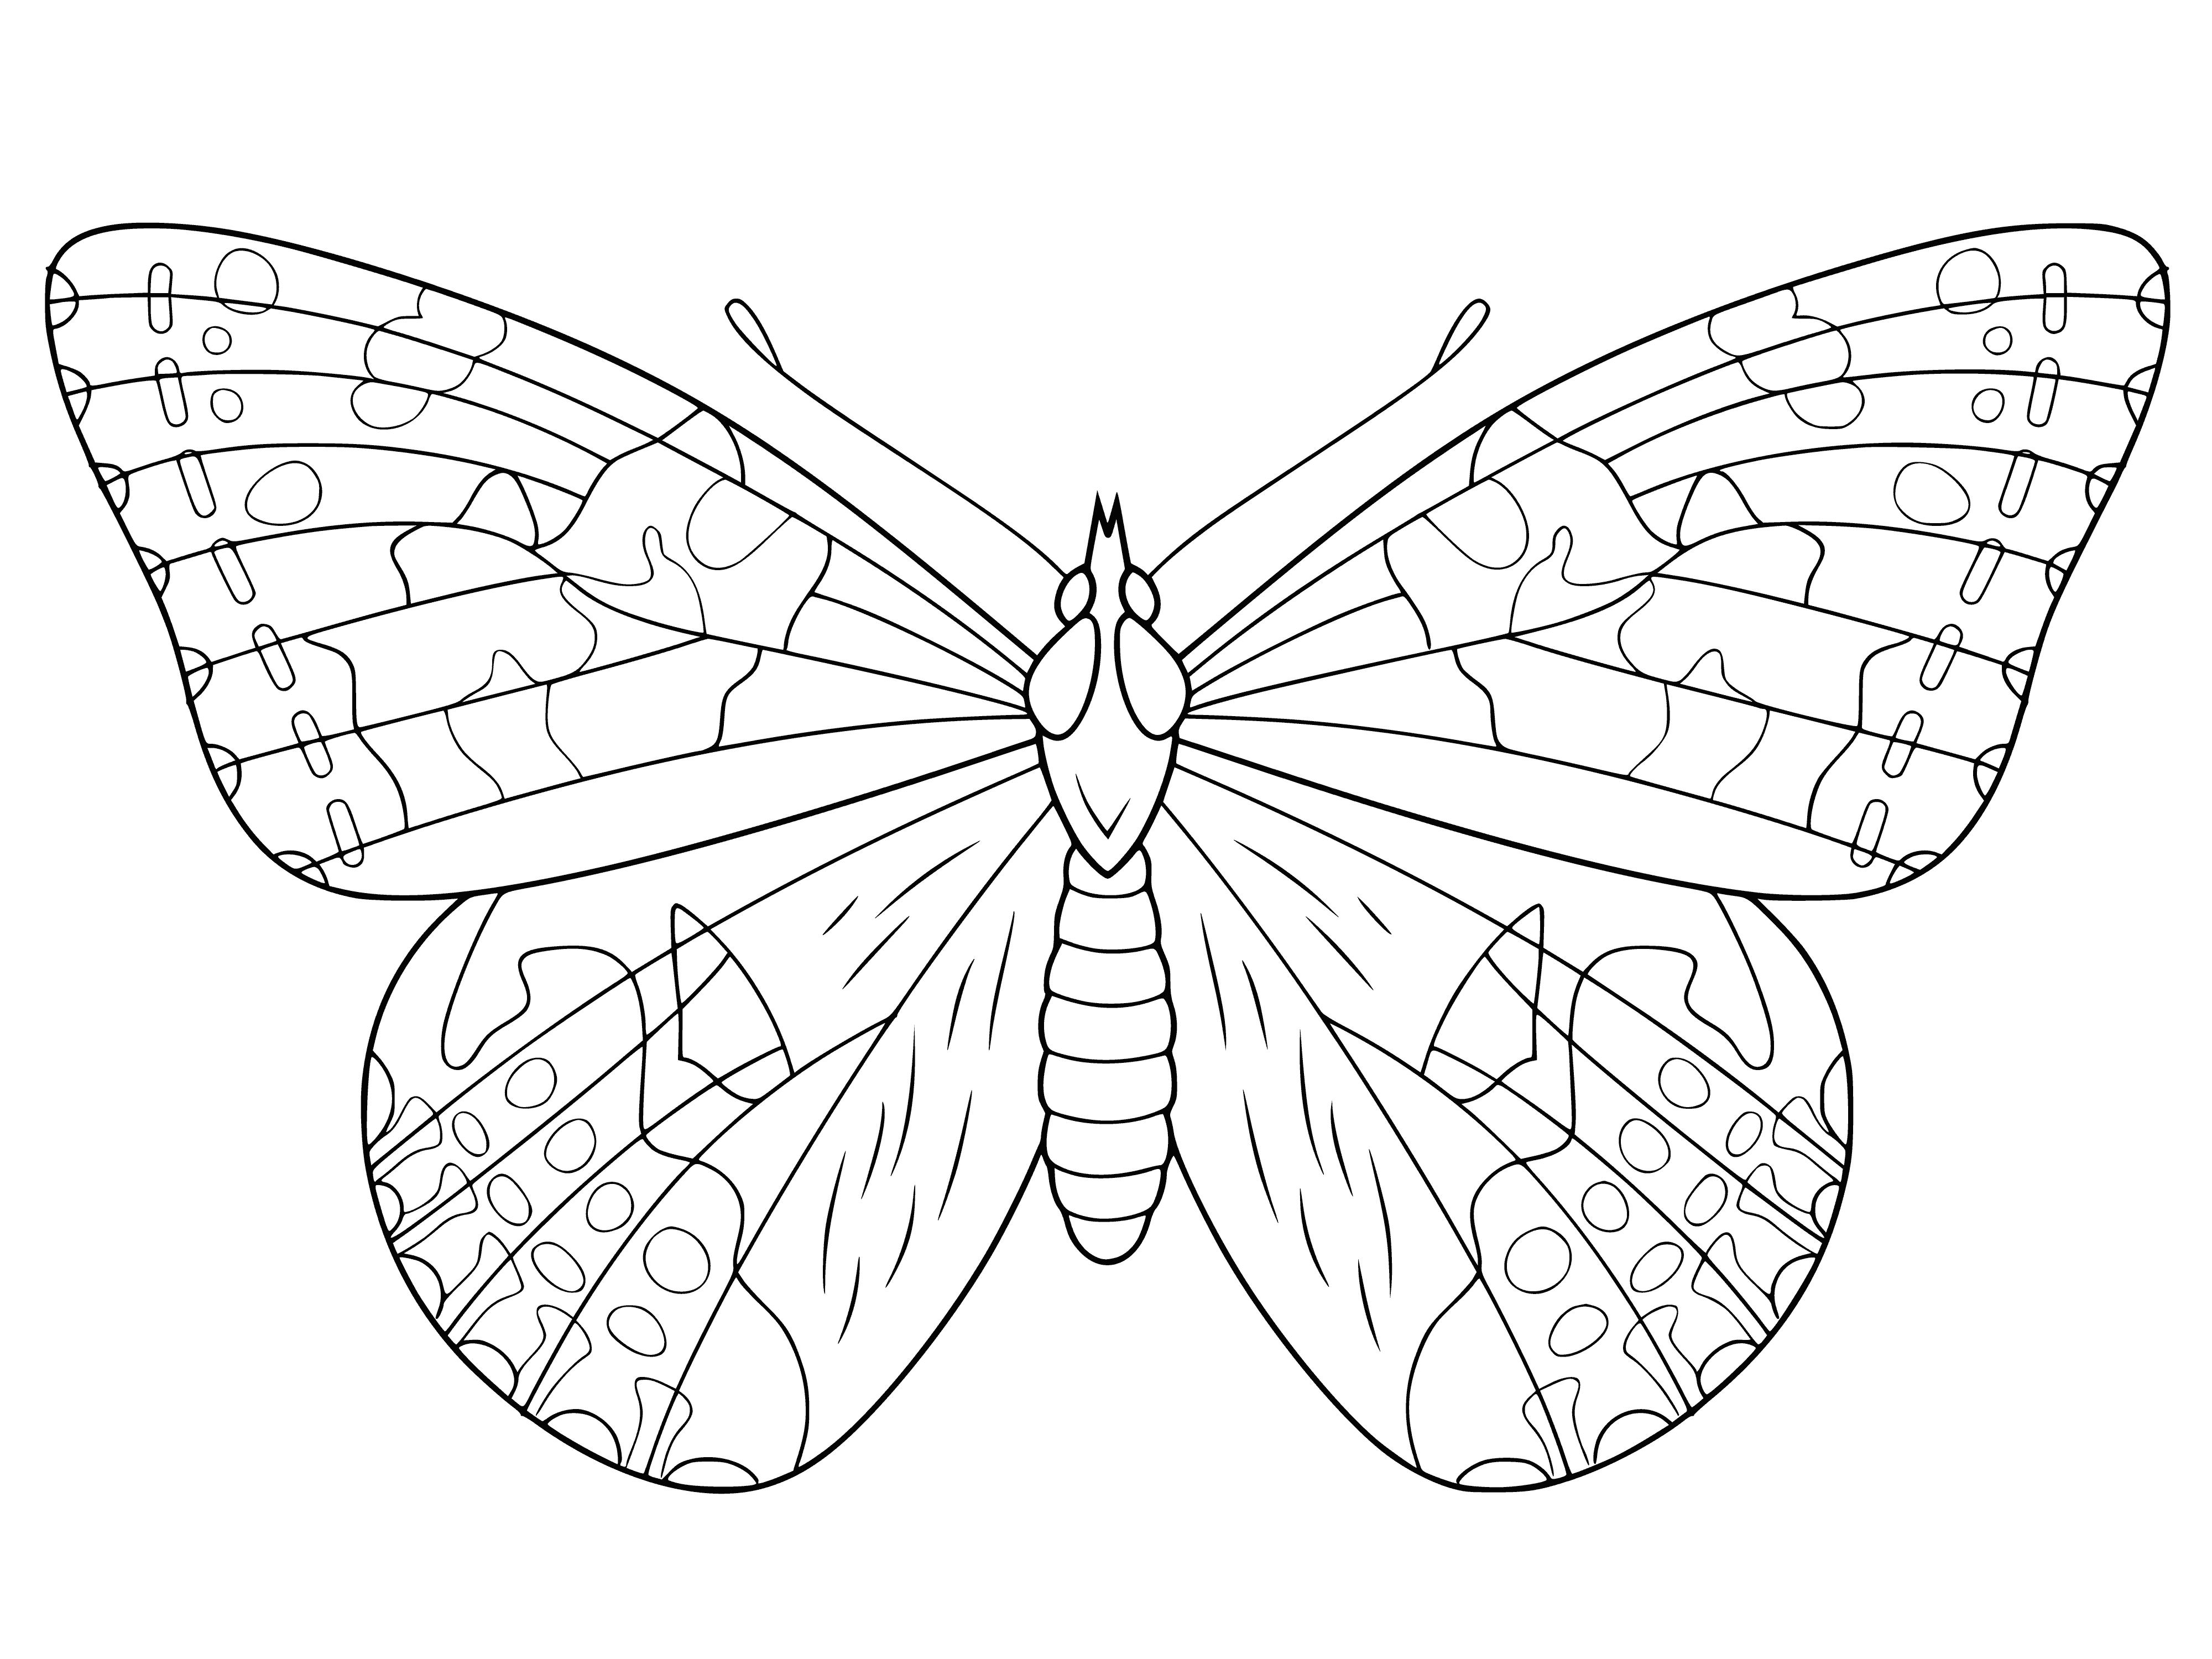 coloring page: Butterfly with large, colorful wings is flying, flapping its gentle wings in yellow, orange and black.